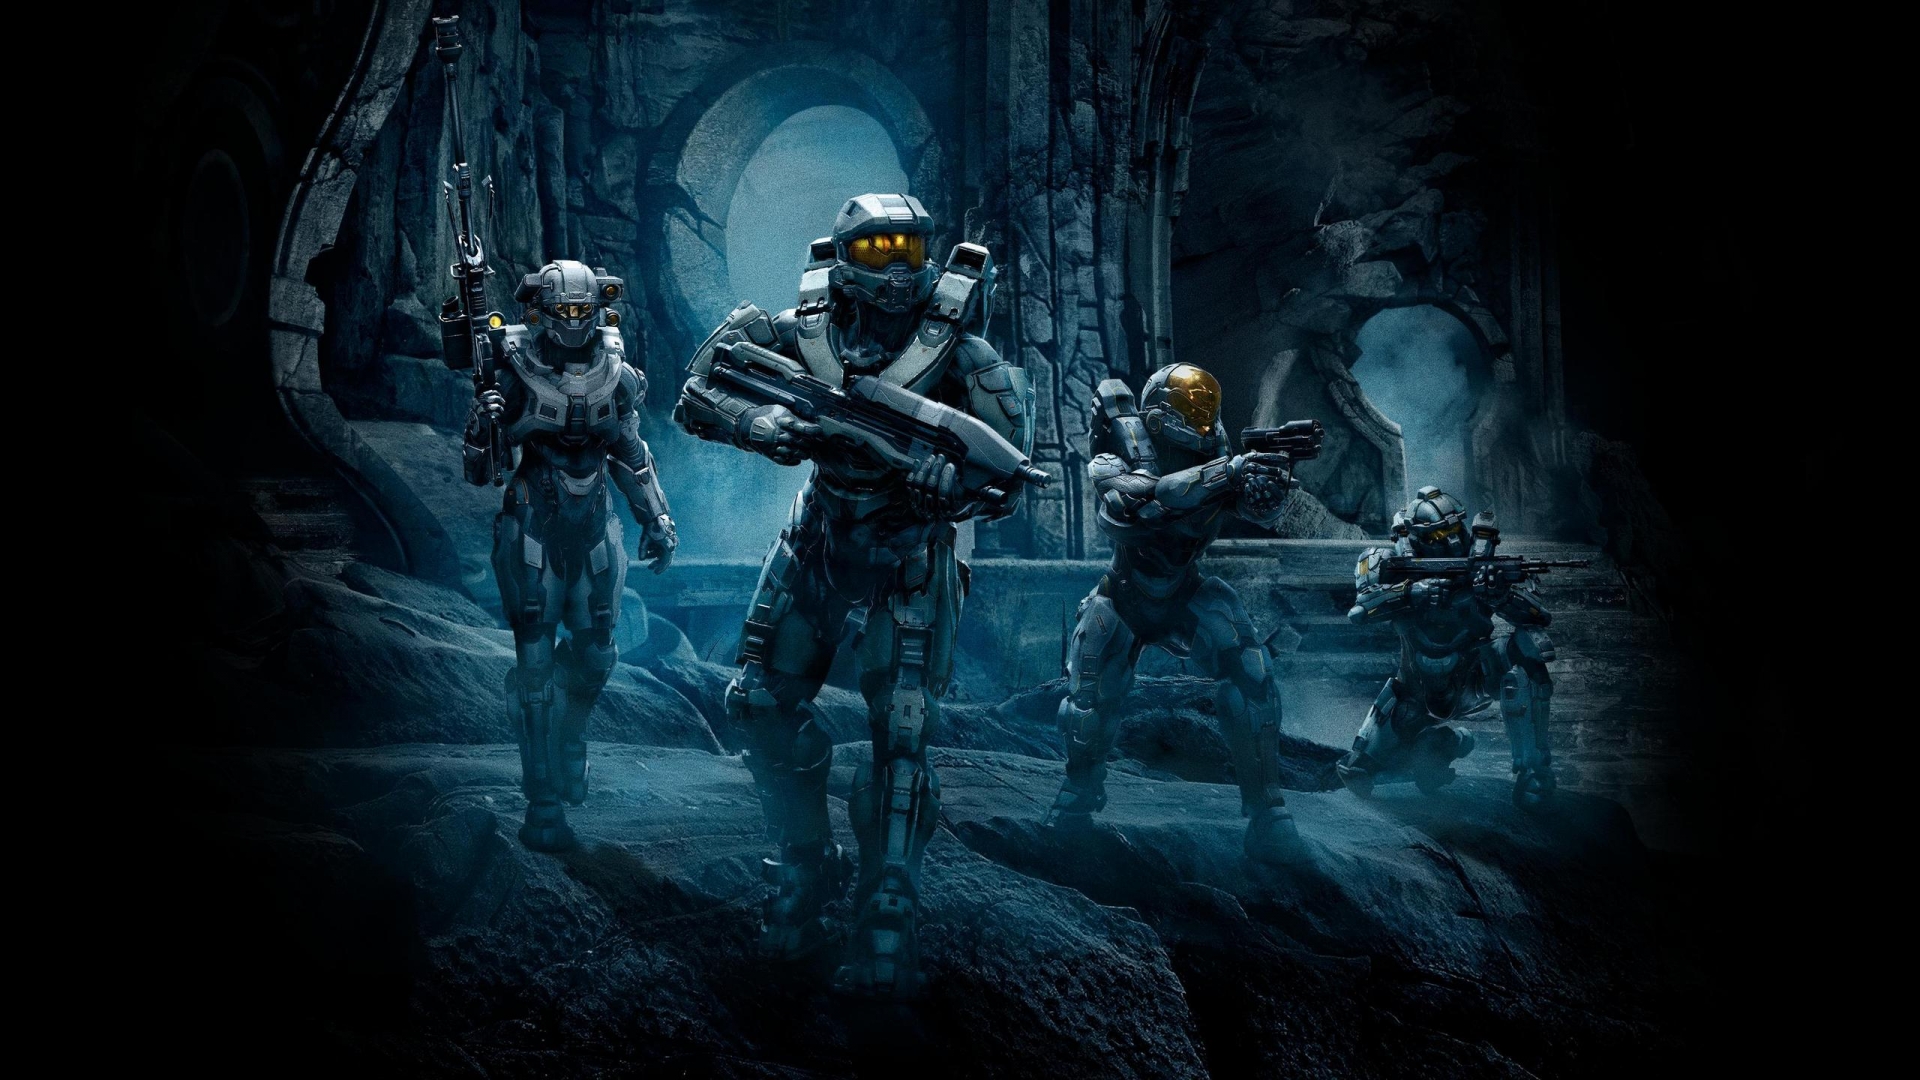 Halo 5 Characters for 1920 x 1080 HDTV 1080p resolution